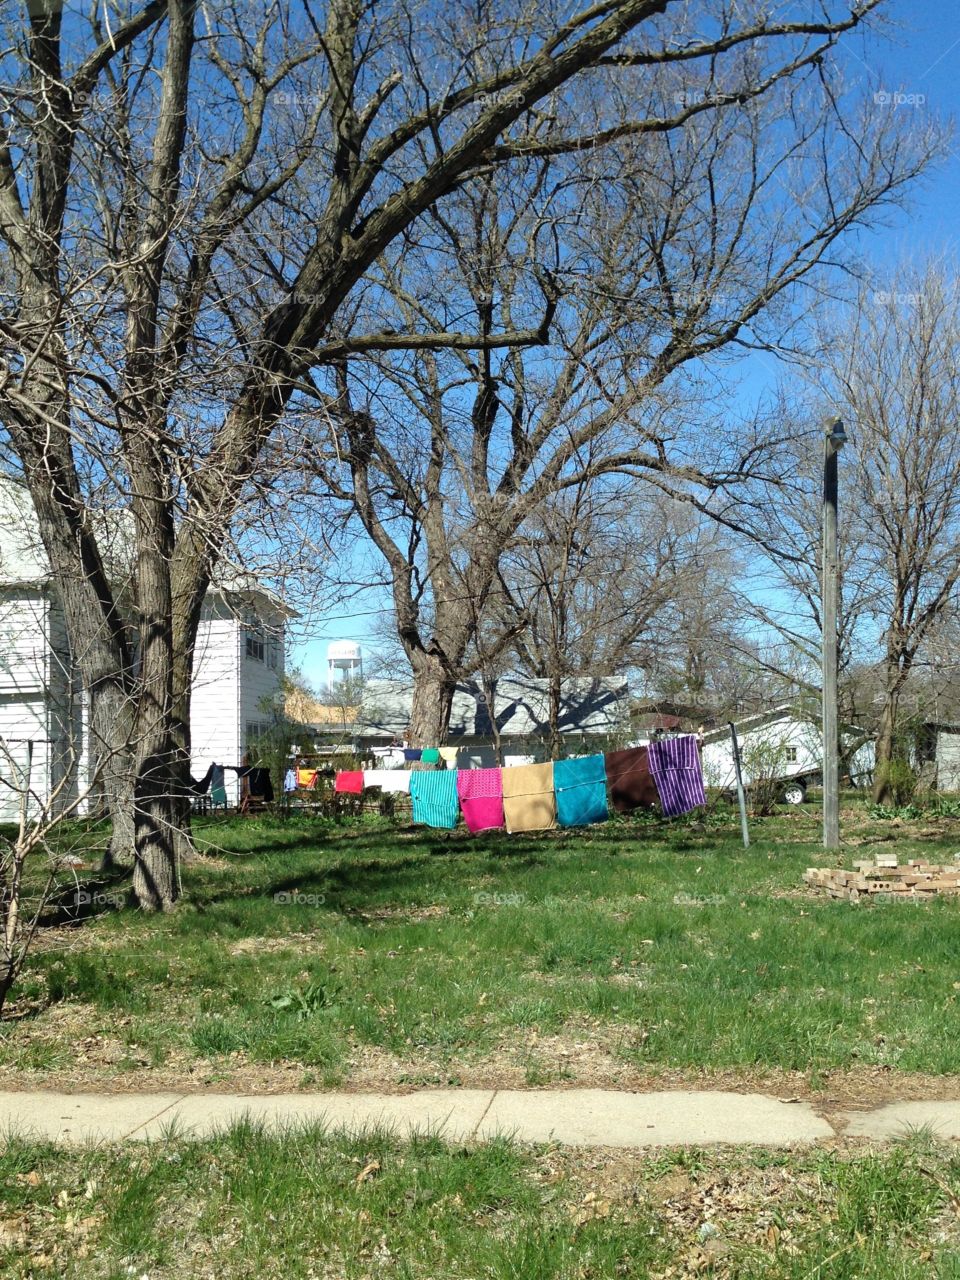 Bright colored clothing hanging on a clothesline